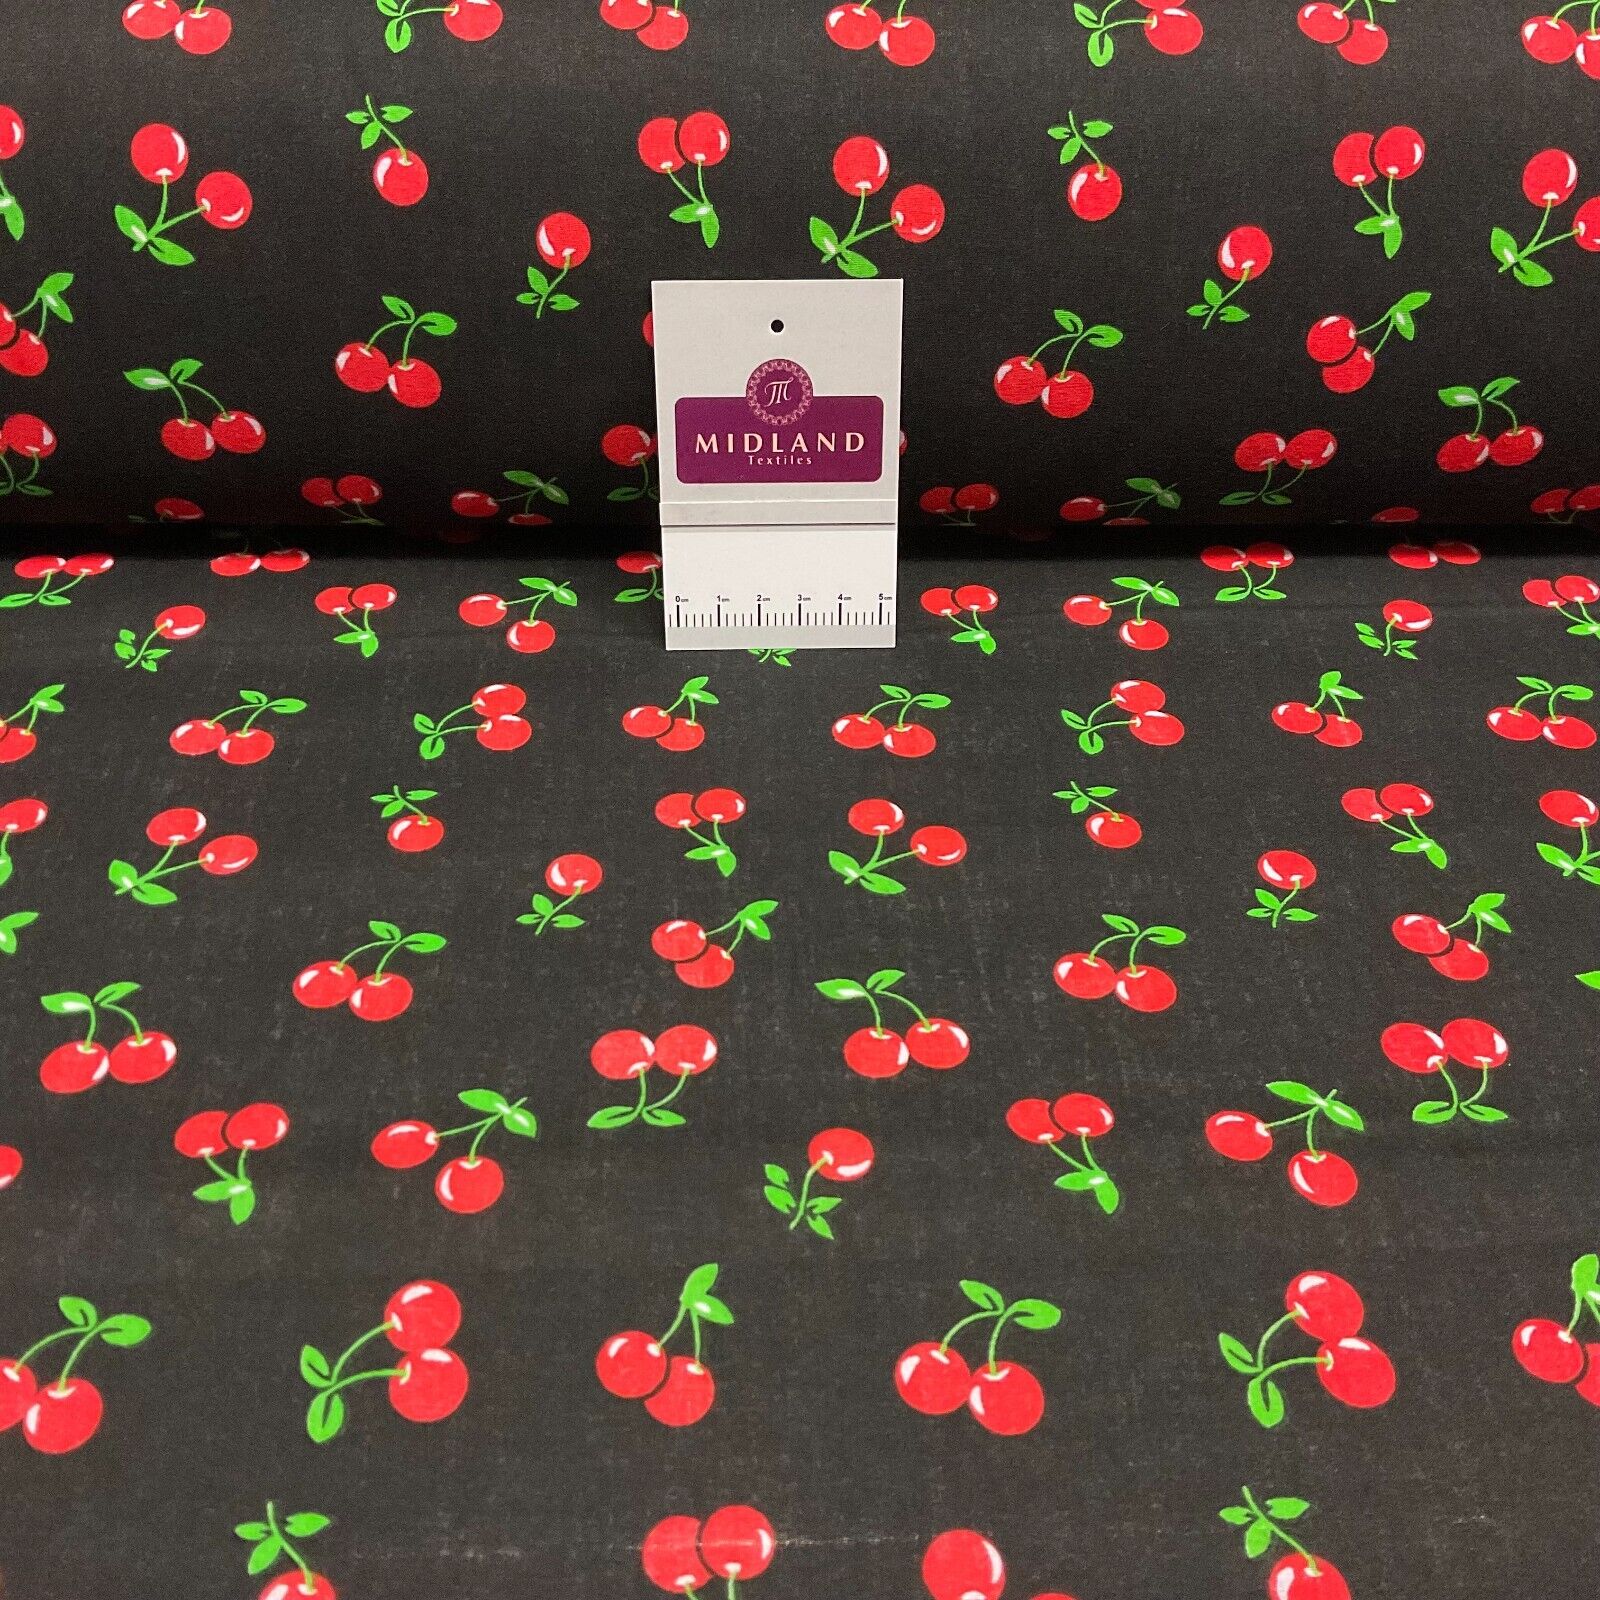 Cherries Fruit cherry Poly cotton printed 110cm wide fabric M1699